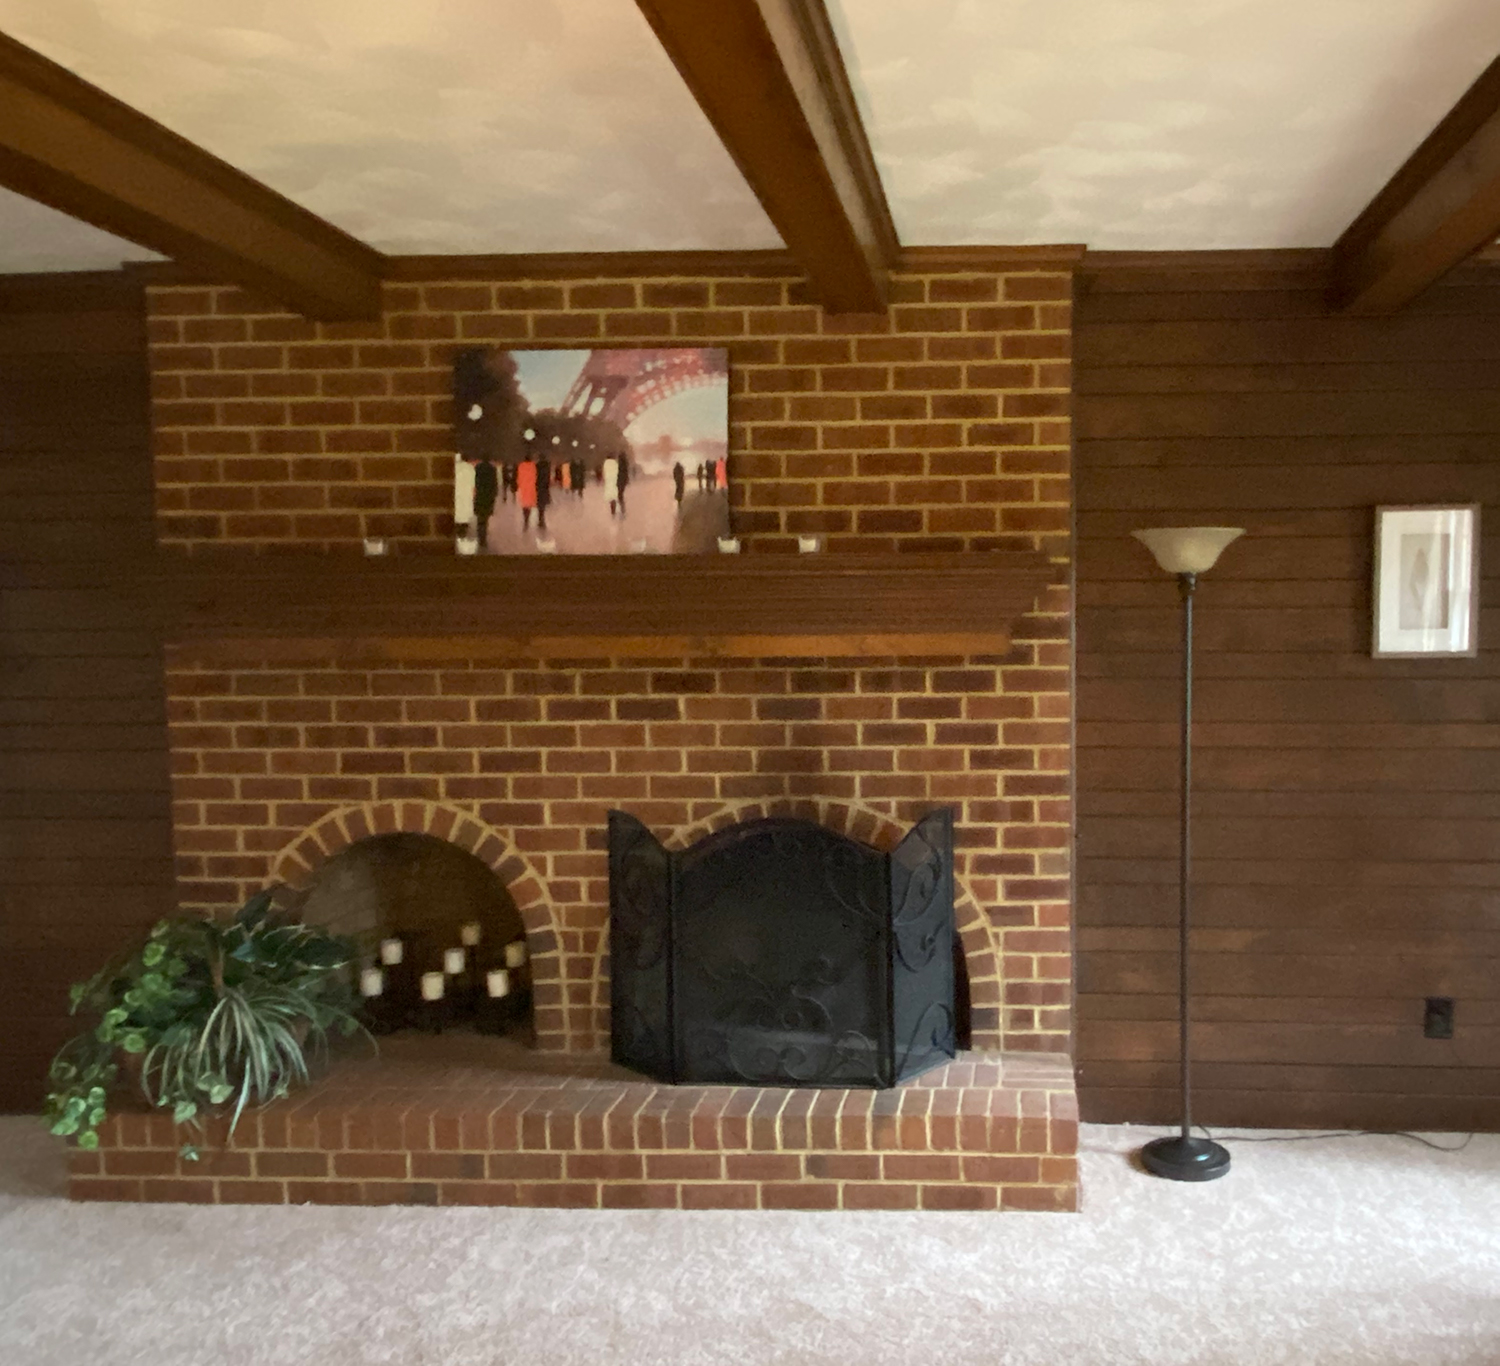 Before & After: Living Room Renovation with Tuft & Trim Interior Design